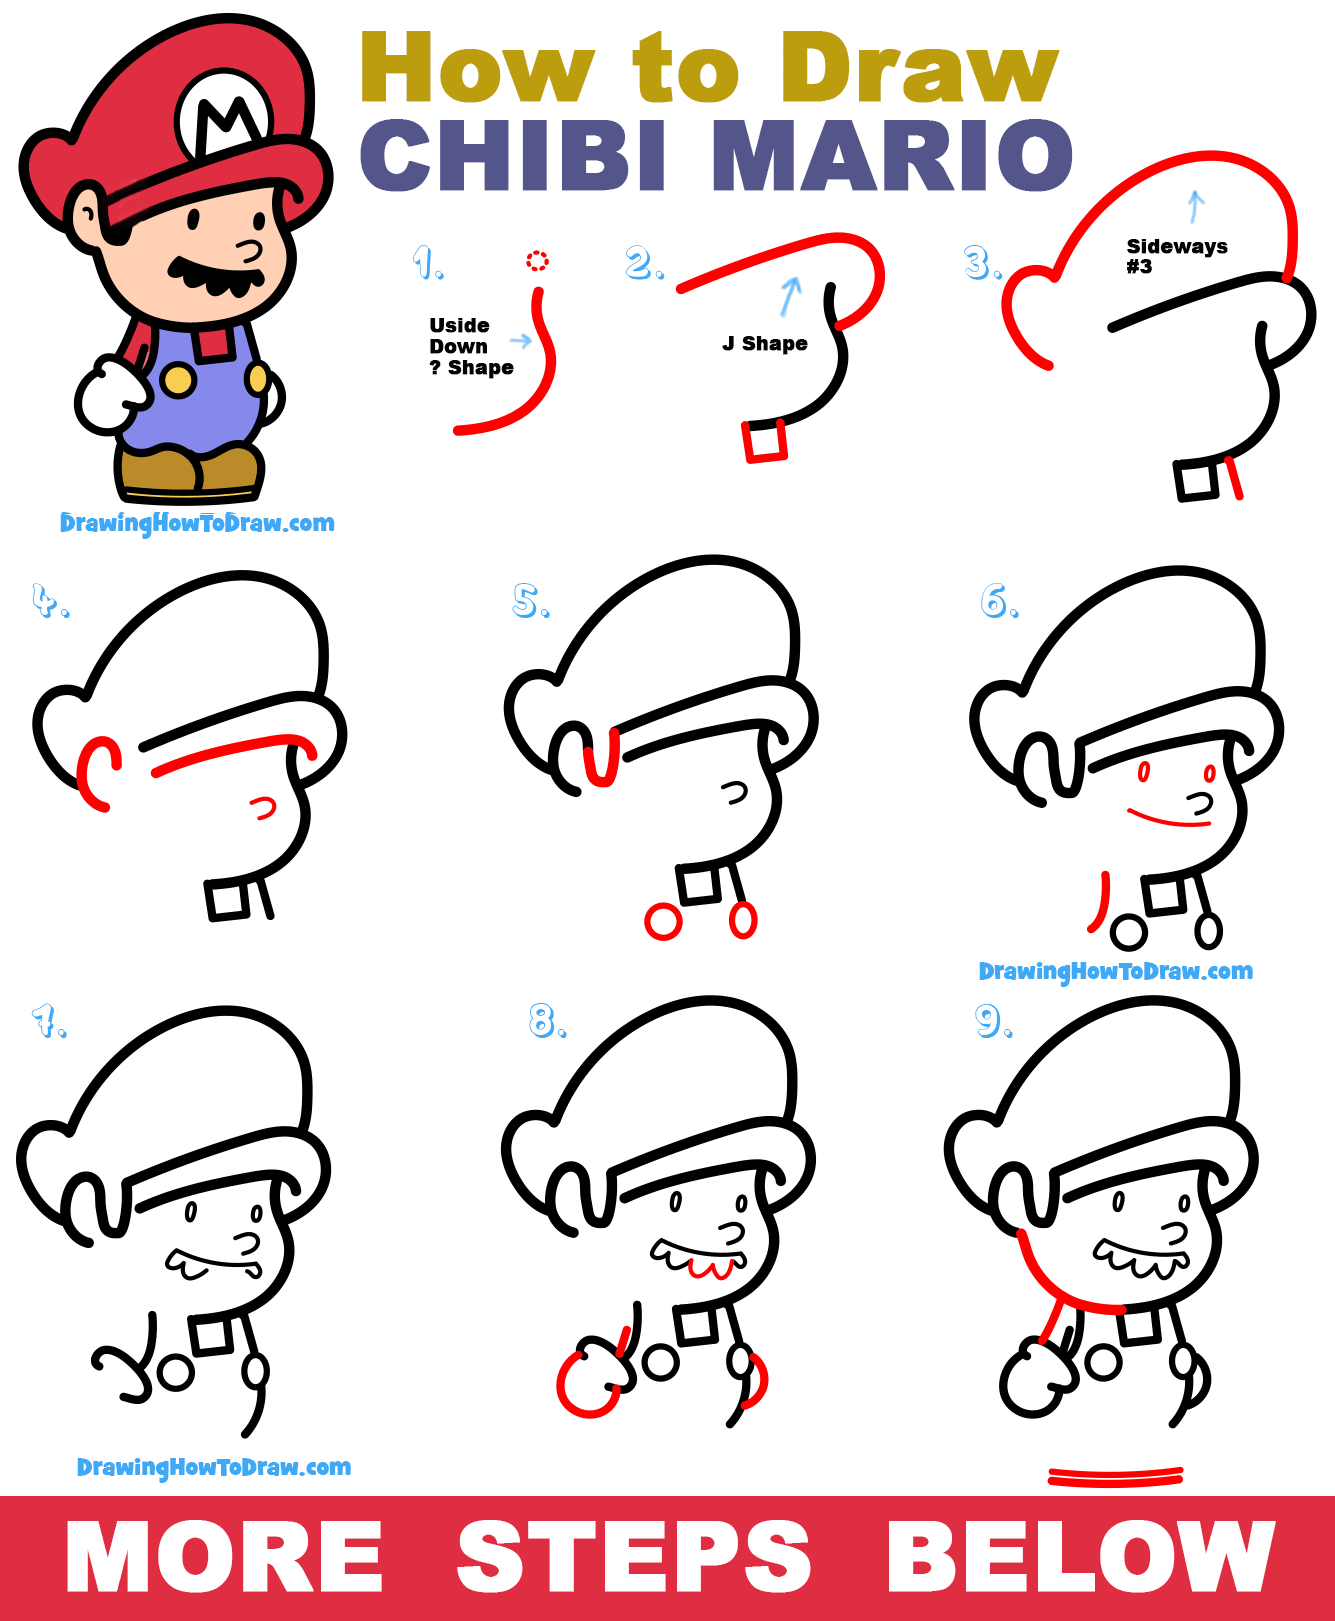 How to Draw a Cute Kawaii / Chibi Mario from Super Mario Bros Step by Step Drawing Tutorial